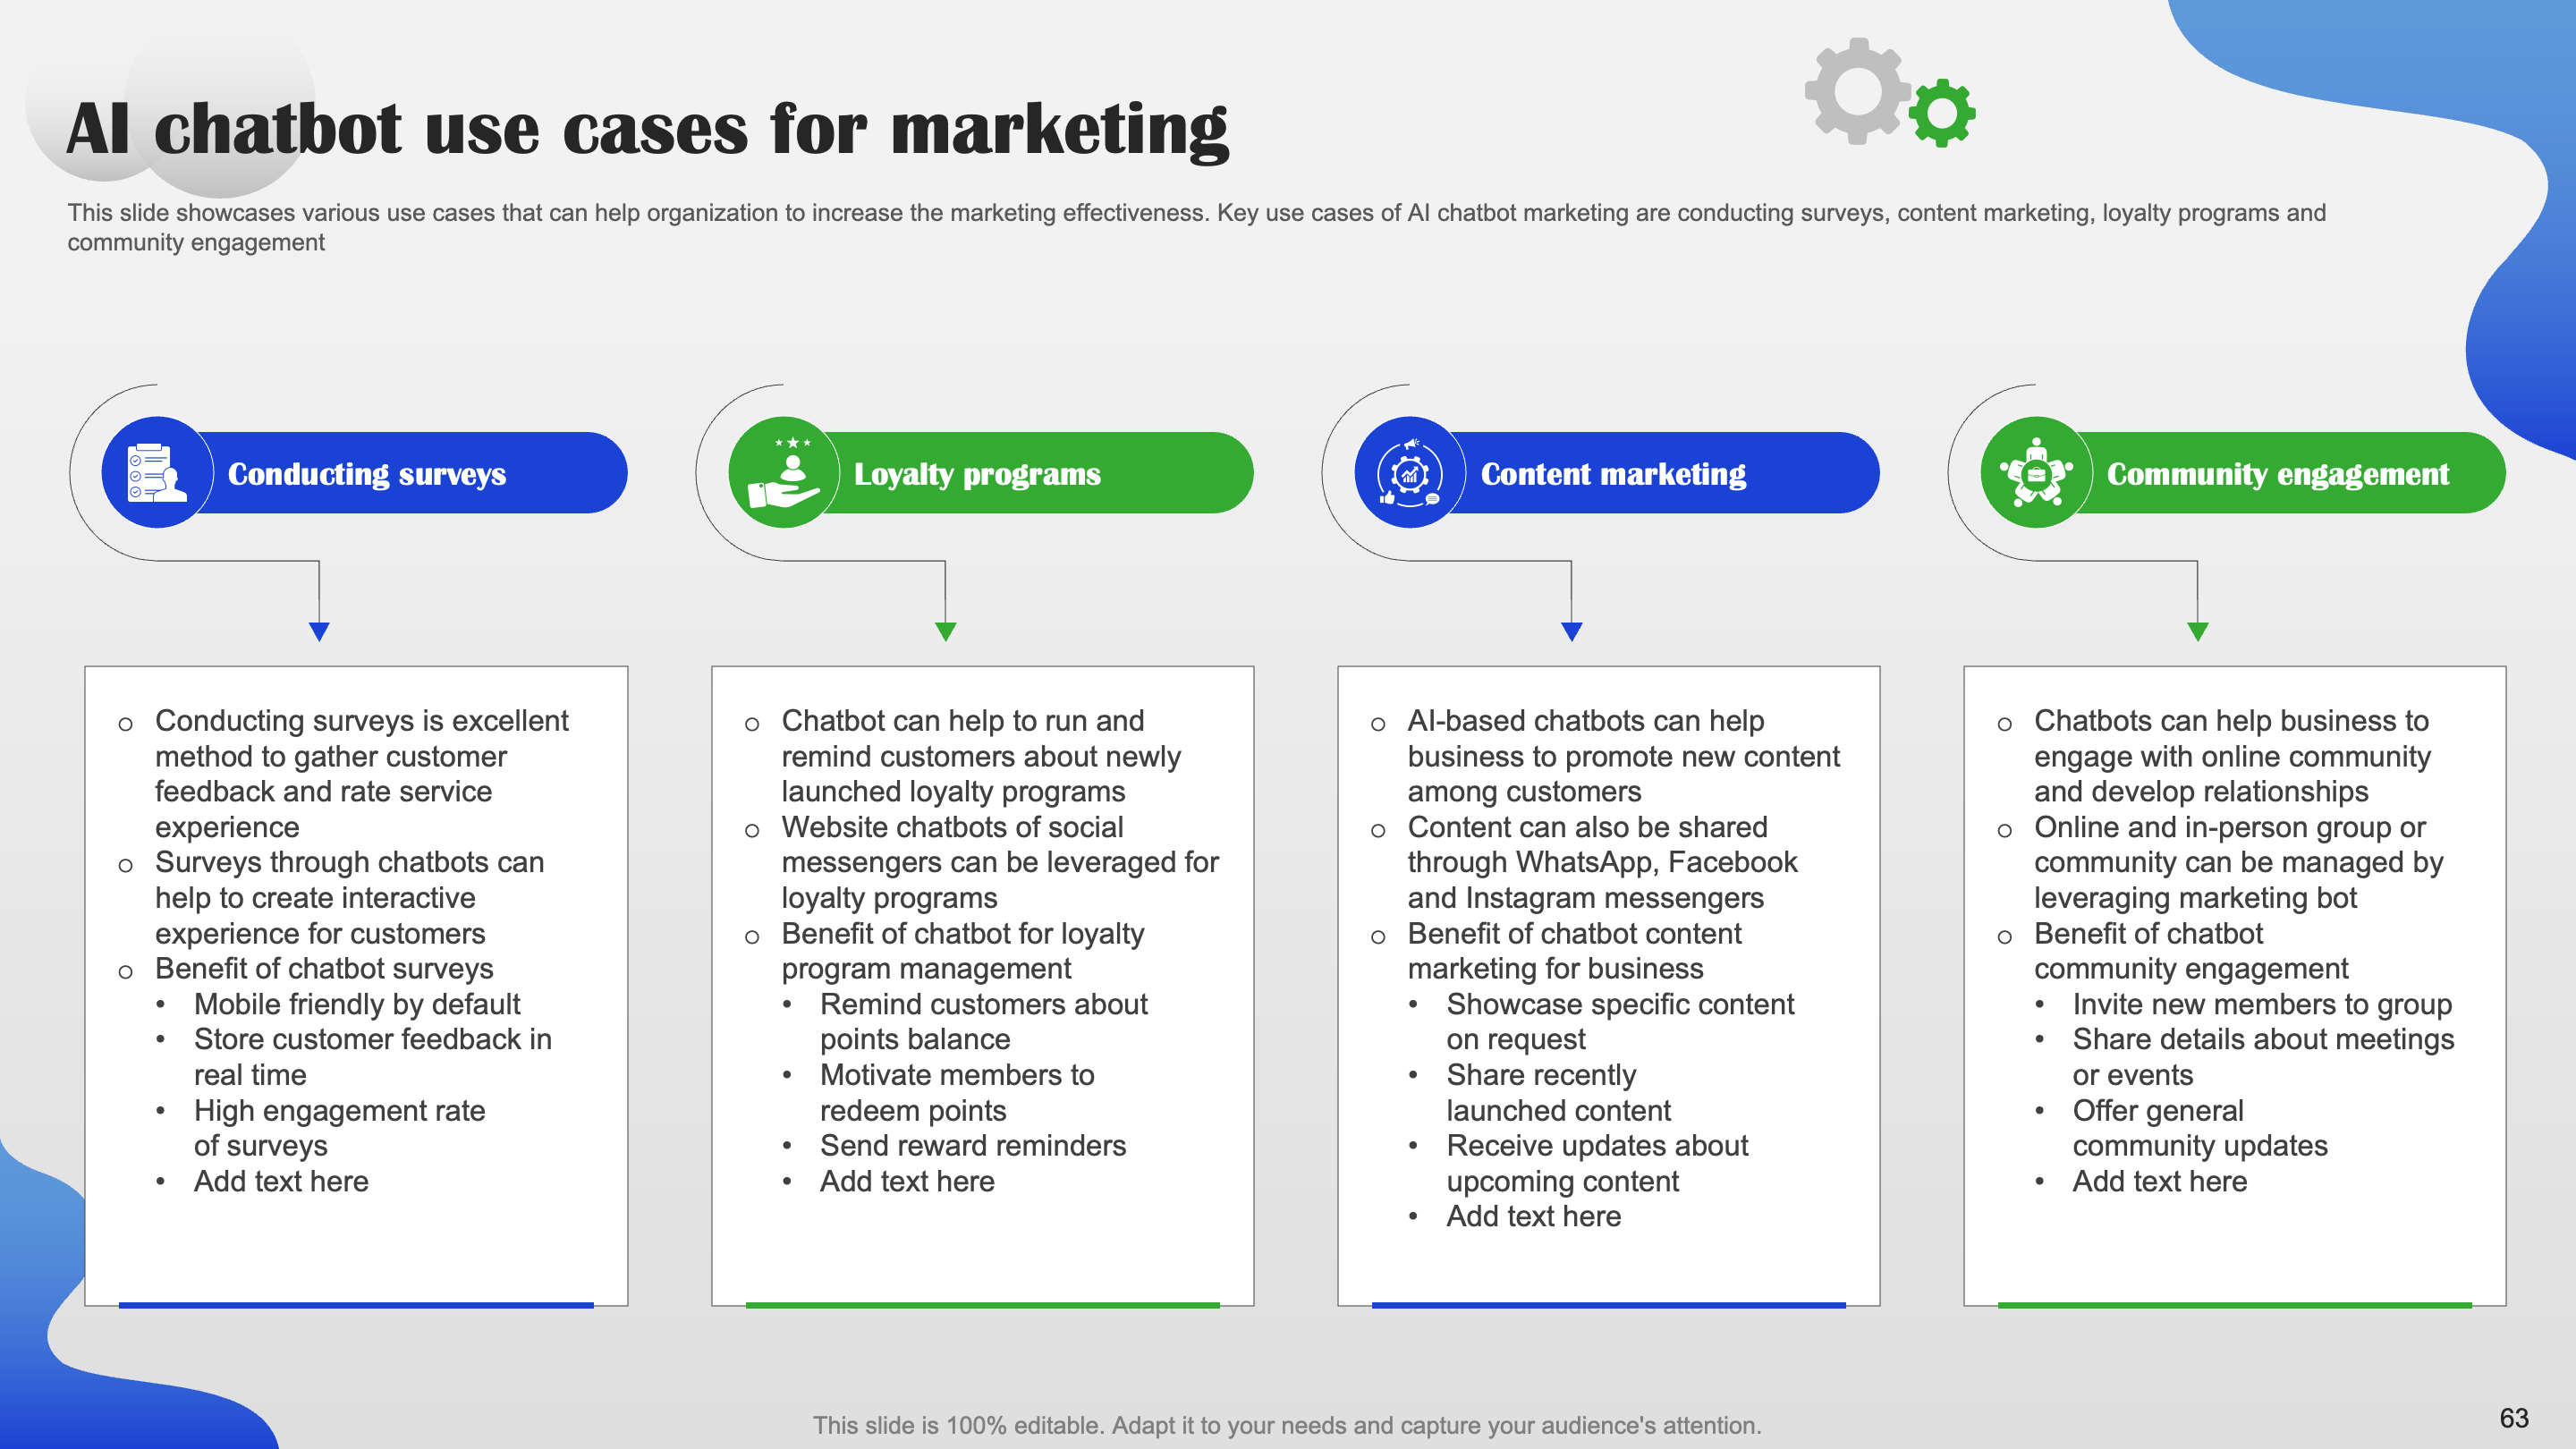 Chatbot Use Cases for Marketing